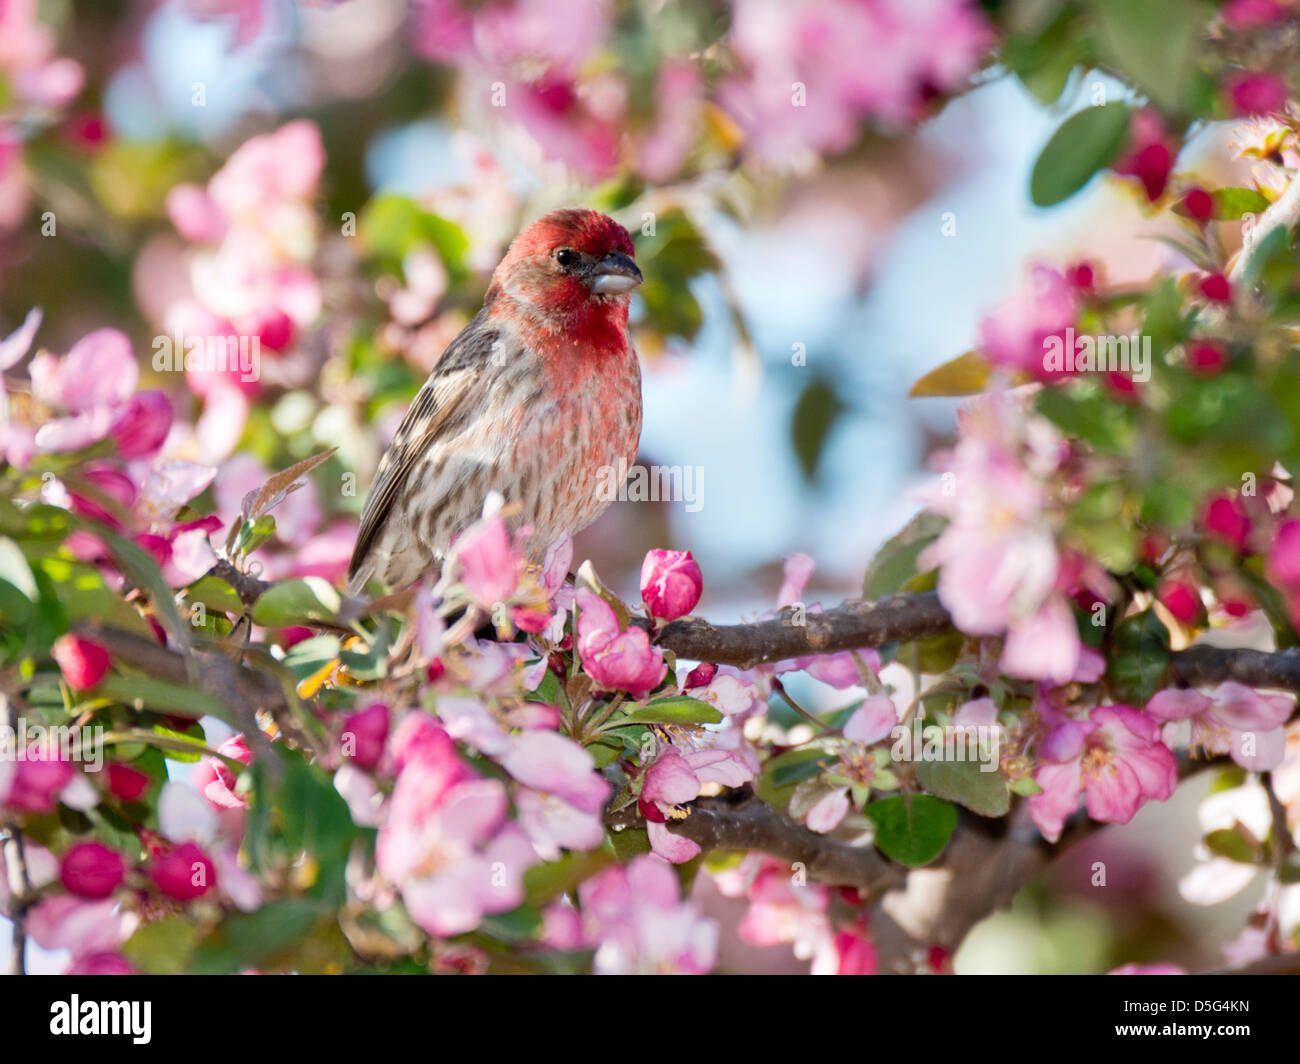 House Finch, Haemorhous mexicanus, perched in a crabapple tree in spring bloom. Oklahoma, USA. Stock Photo